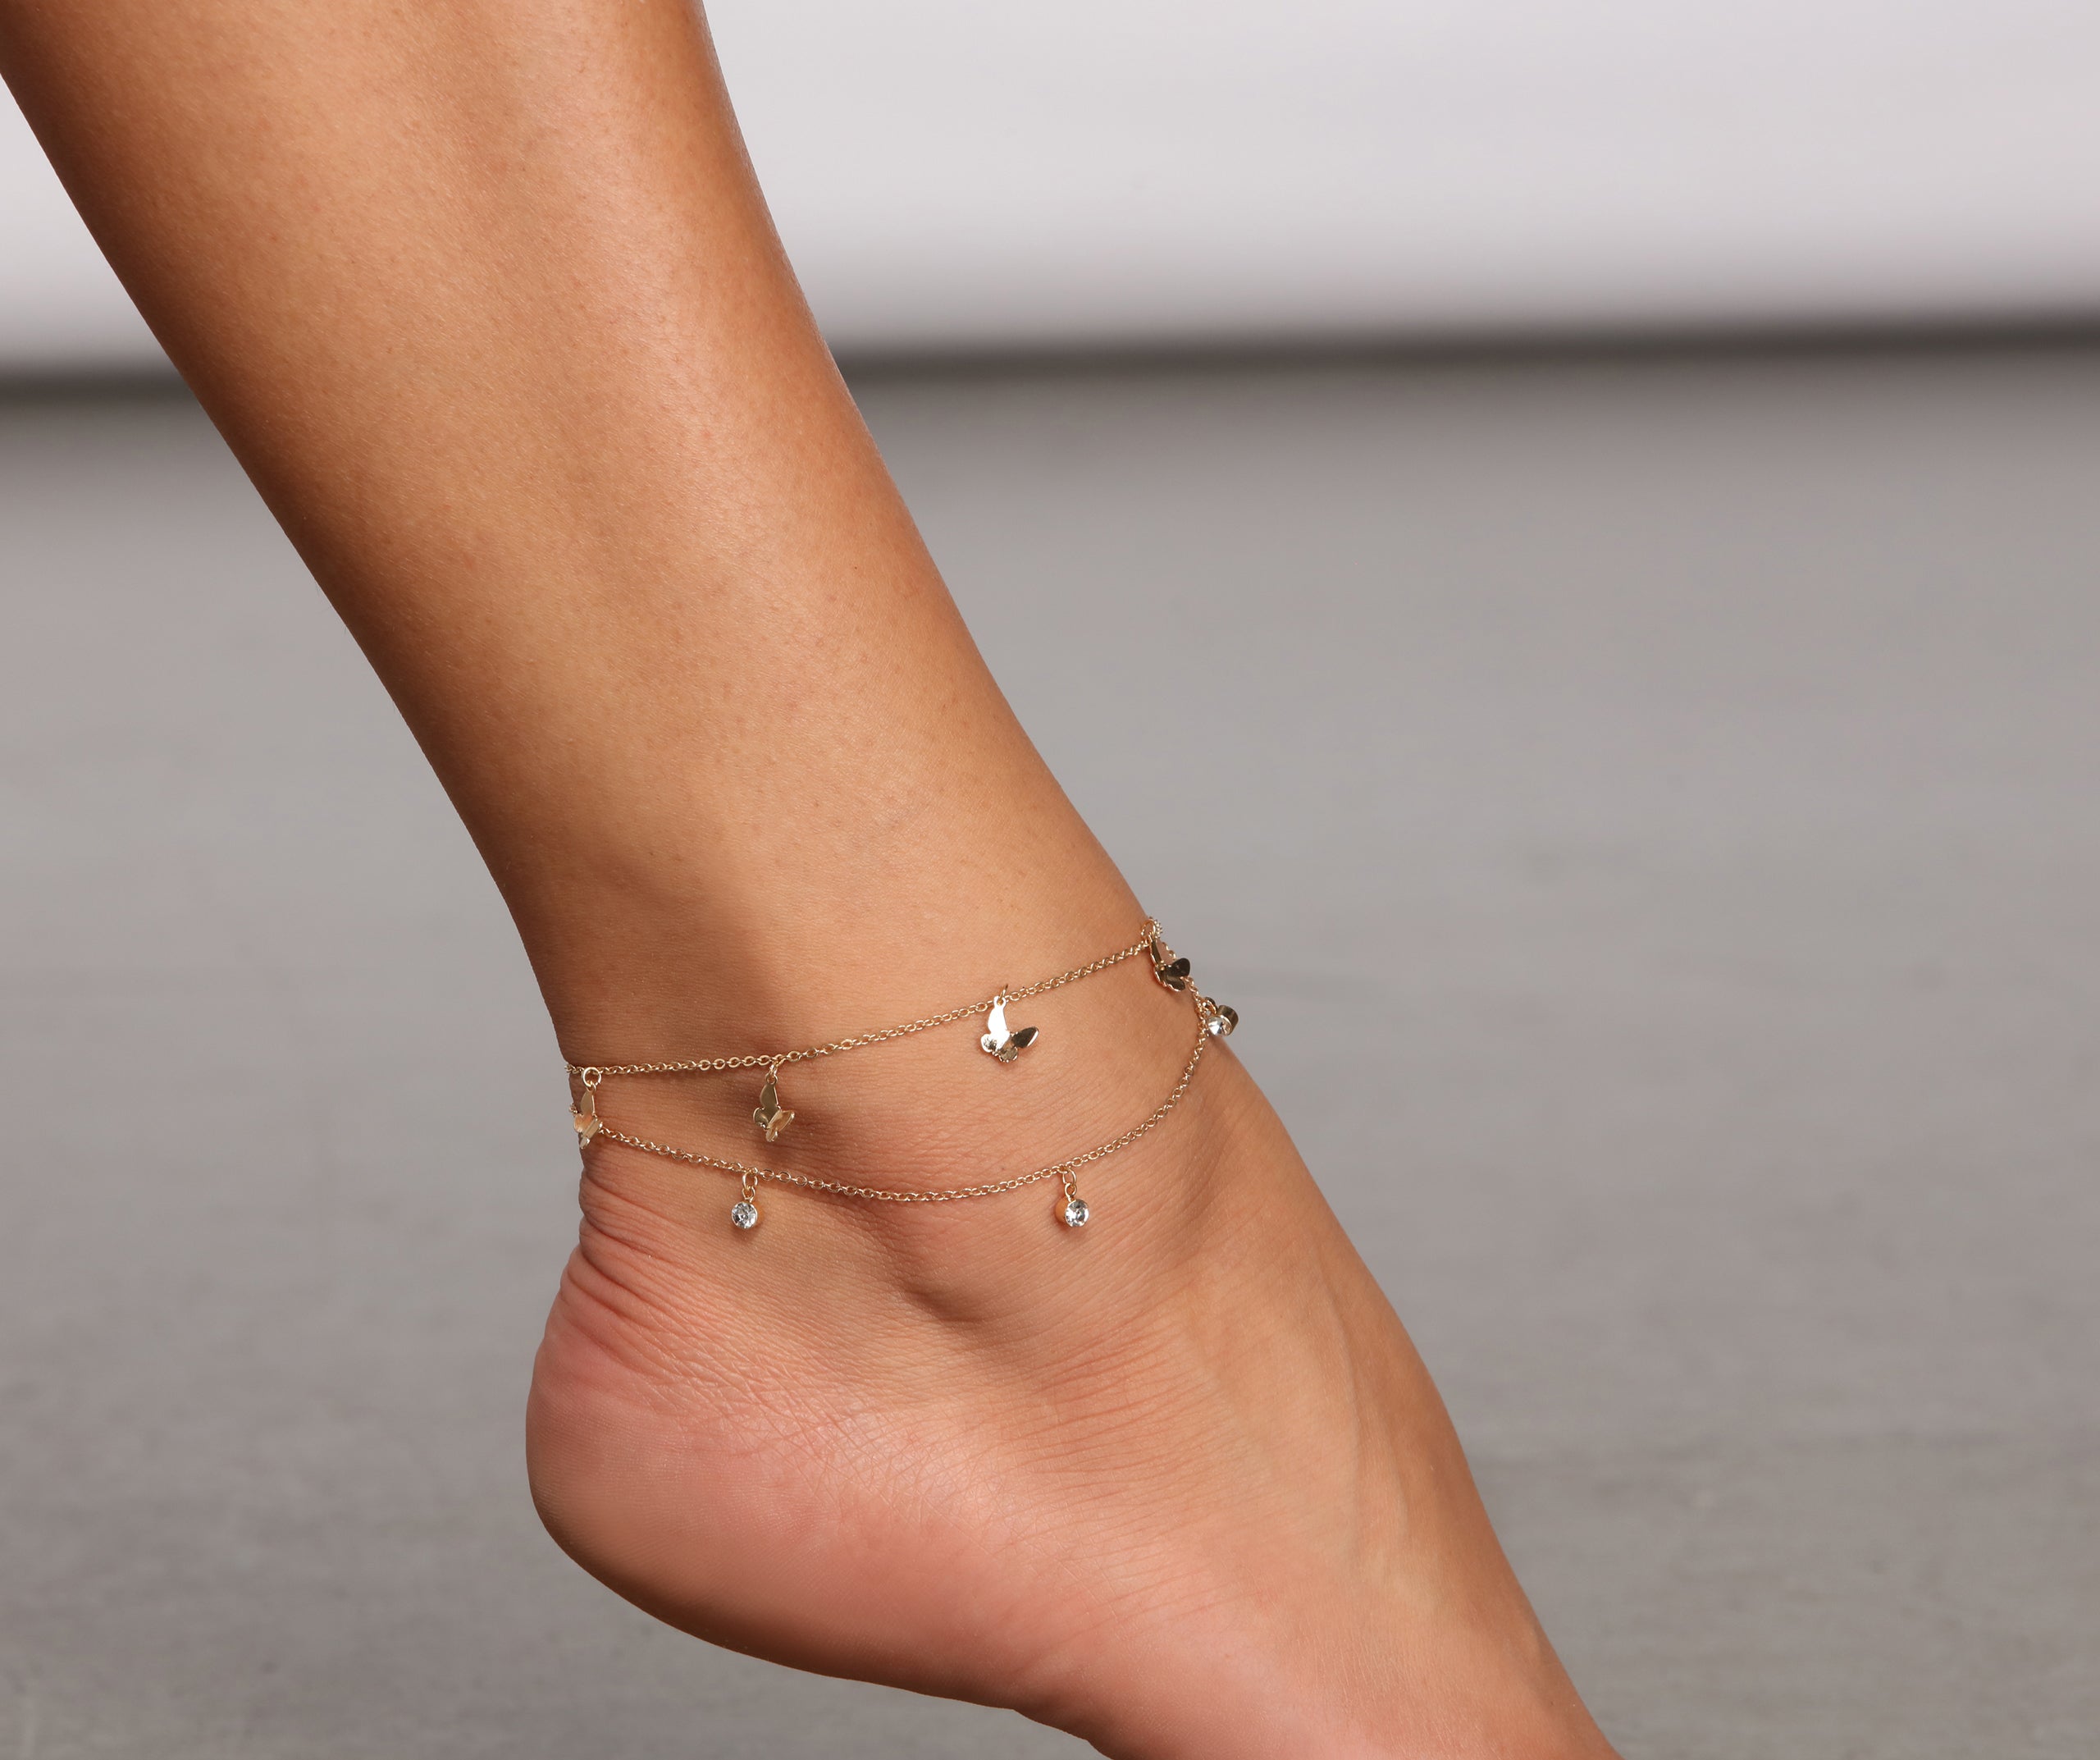 Trendy-Chic Layered Anklet